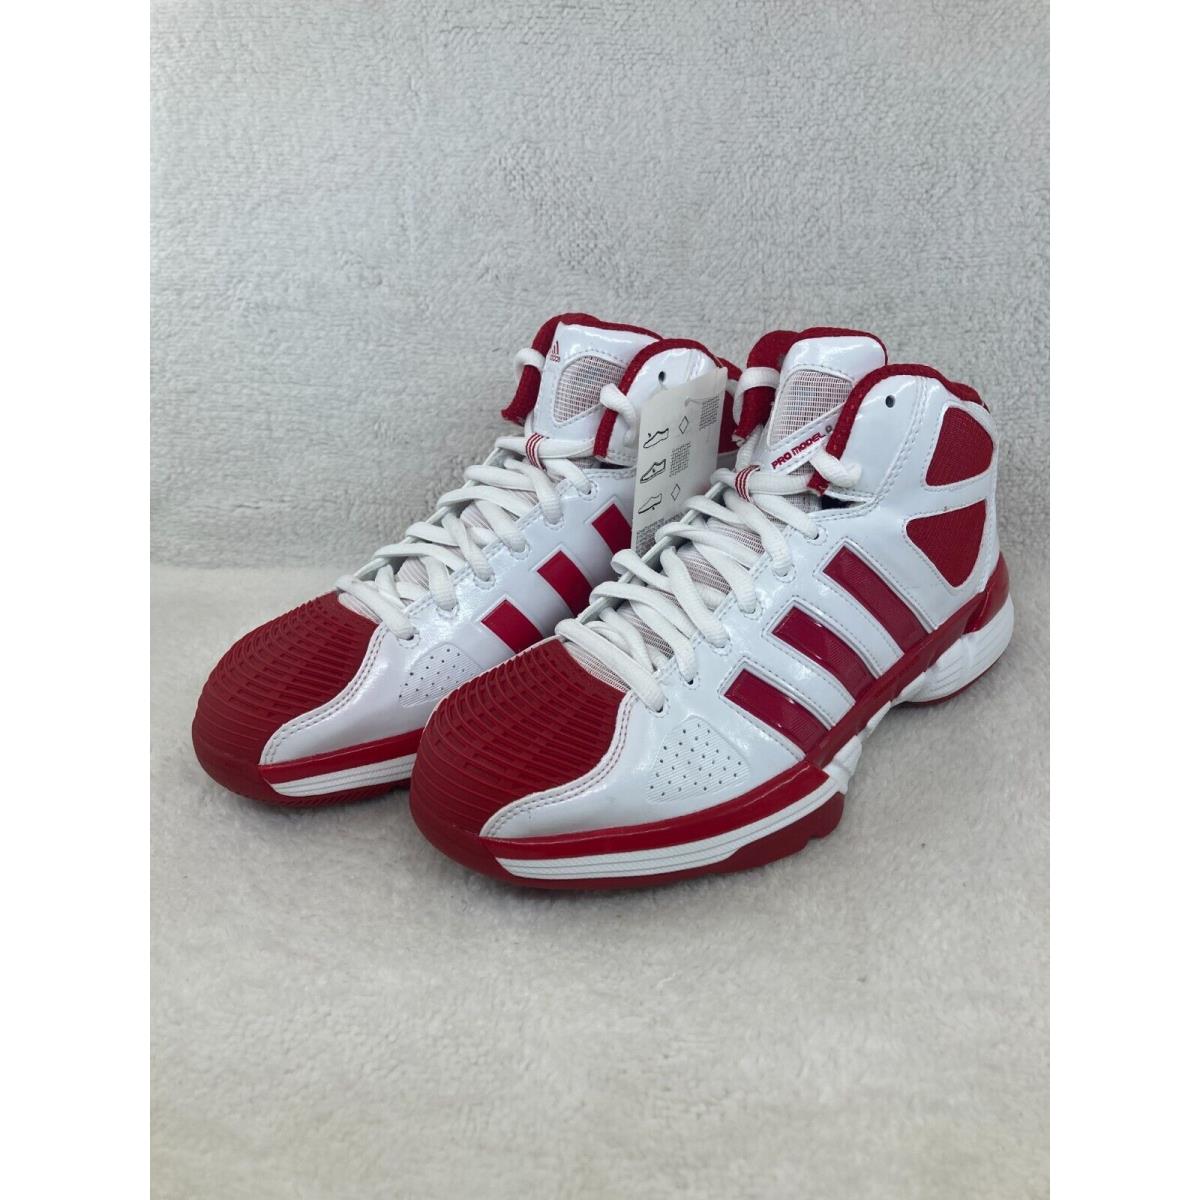 Adidas Pro Model 0 Men`s 7 Basketball Shoes White Red | - Adidas shoes Promodel - White | SporTipTop